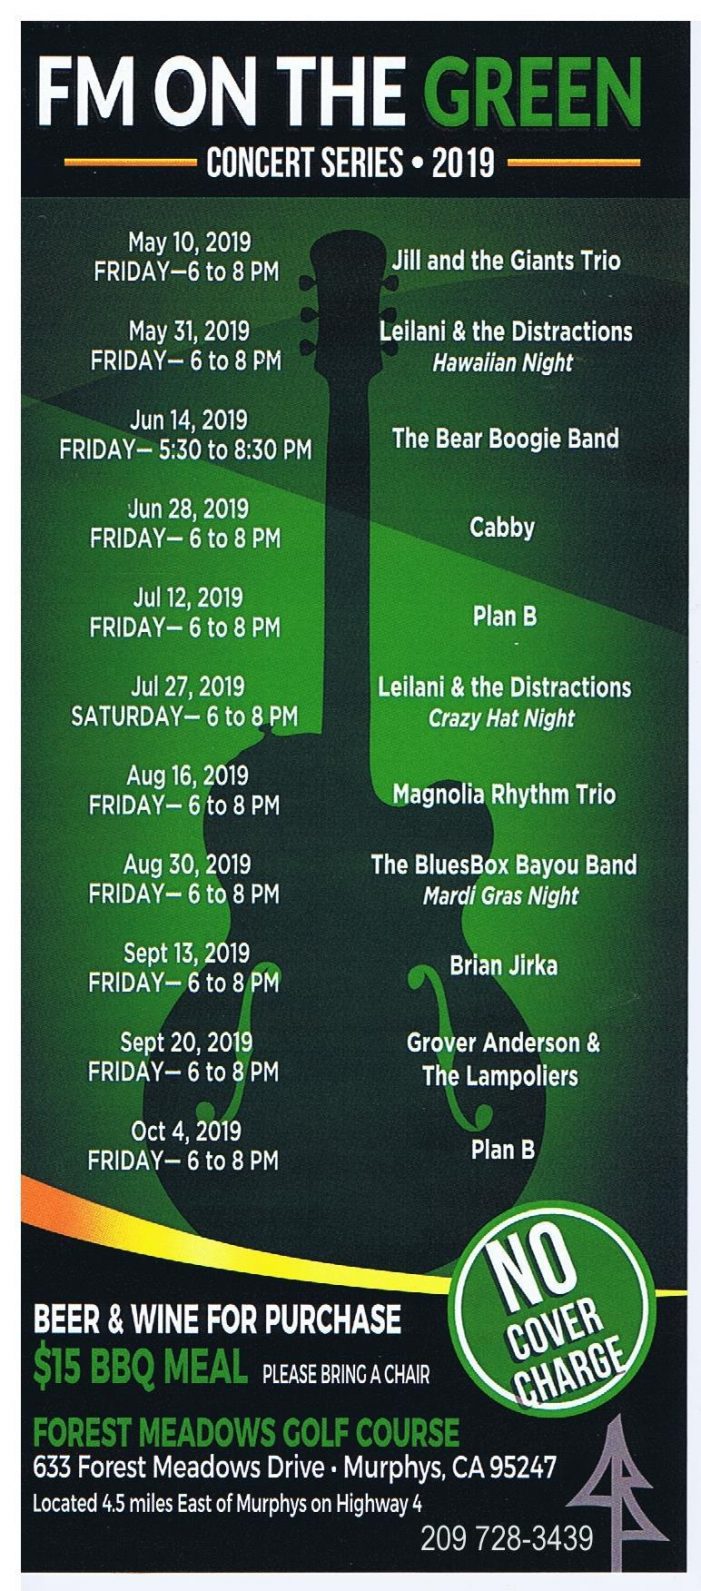 Magnolia Rhythm Trio August 16 at “FM On The Green” Tonight at Forest Meadows